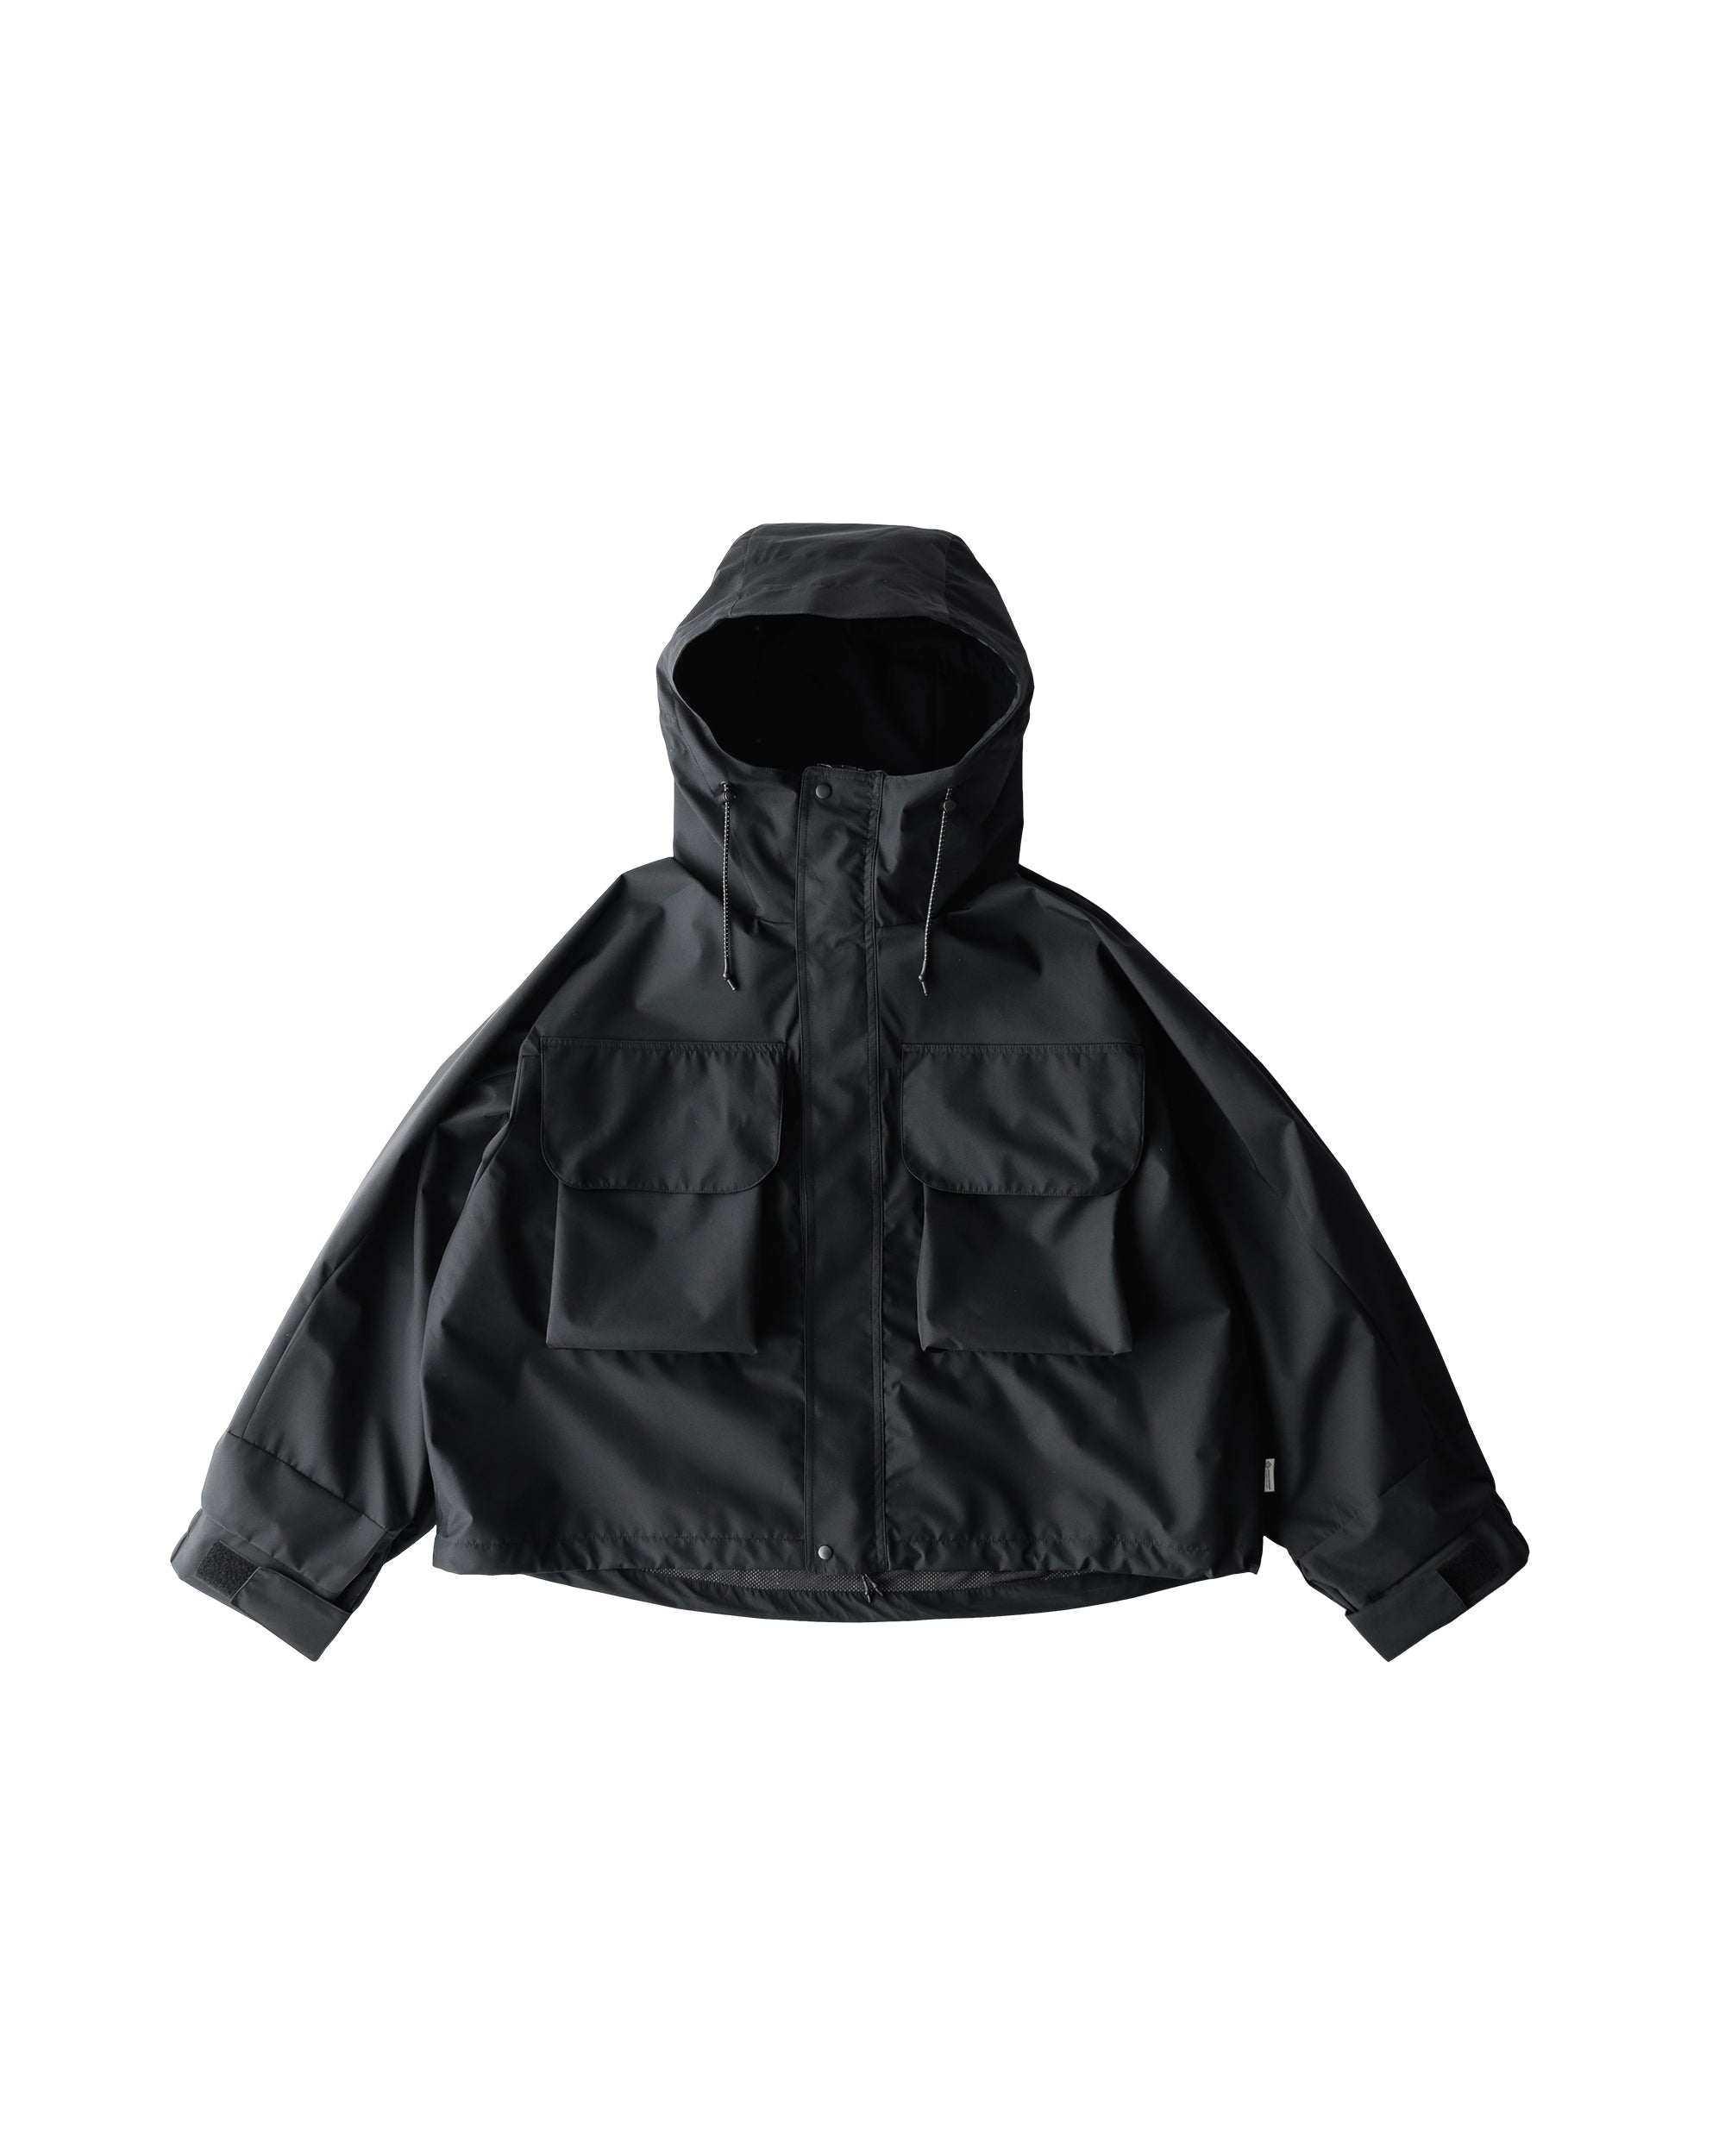 【3.6 wed 20:00- Pre-order】+phenix WINDSTOPPER® by GORE-TEX LABS CITY WADING  JACKET